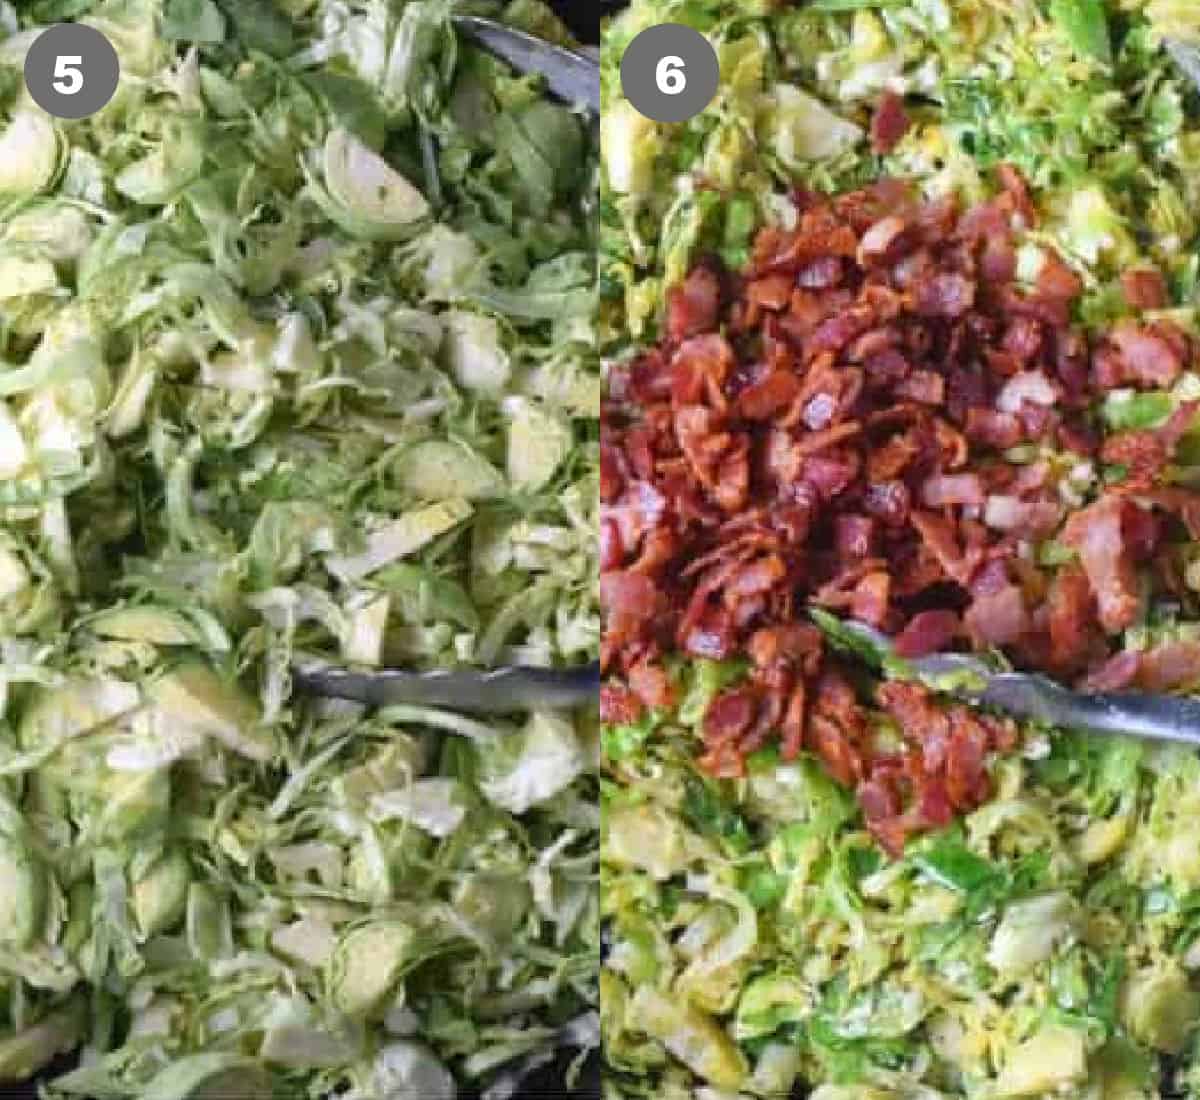 Shredded brussel sprouts in a skillet then garlic and bacon added.